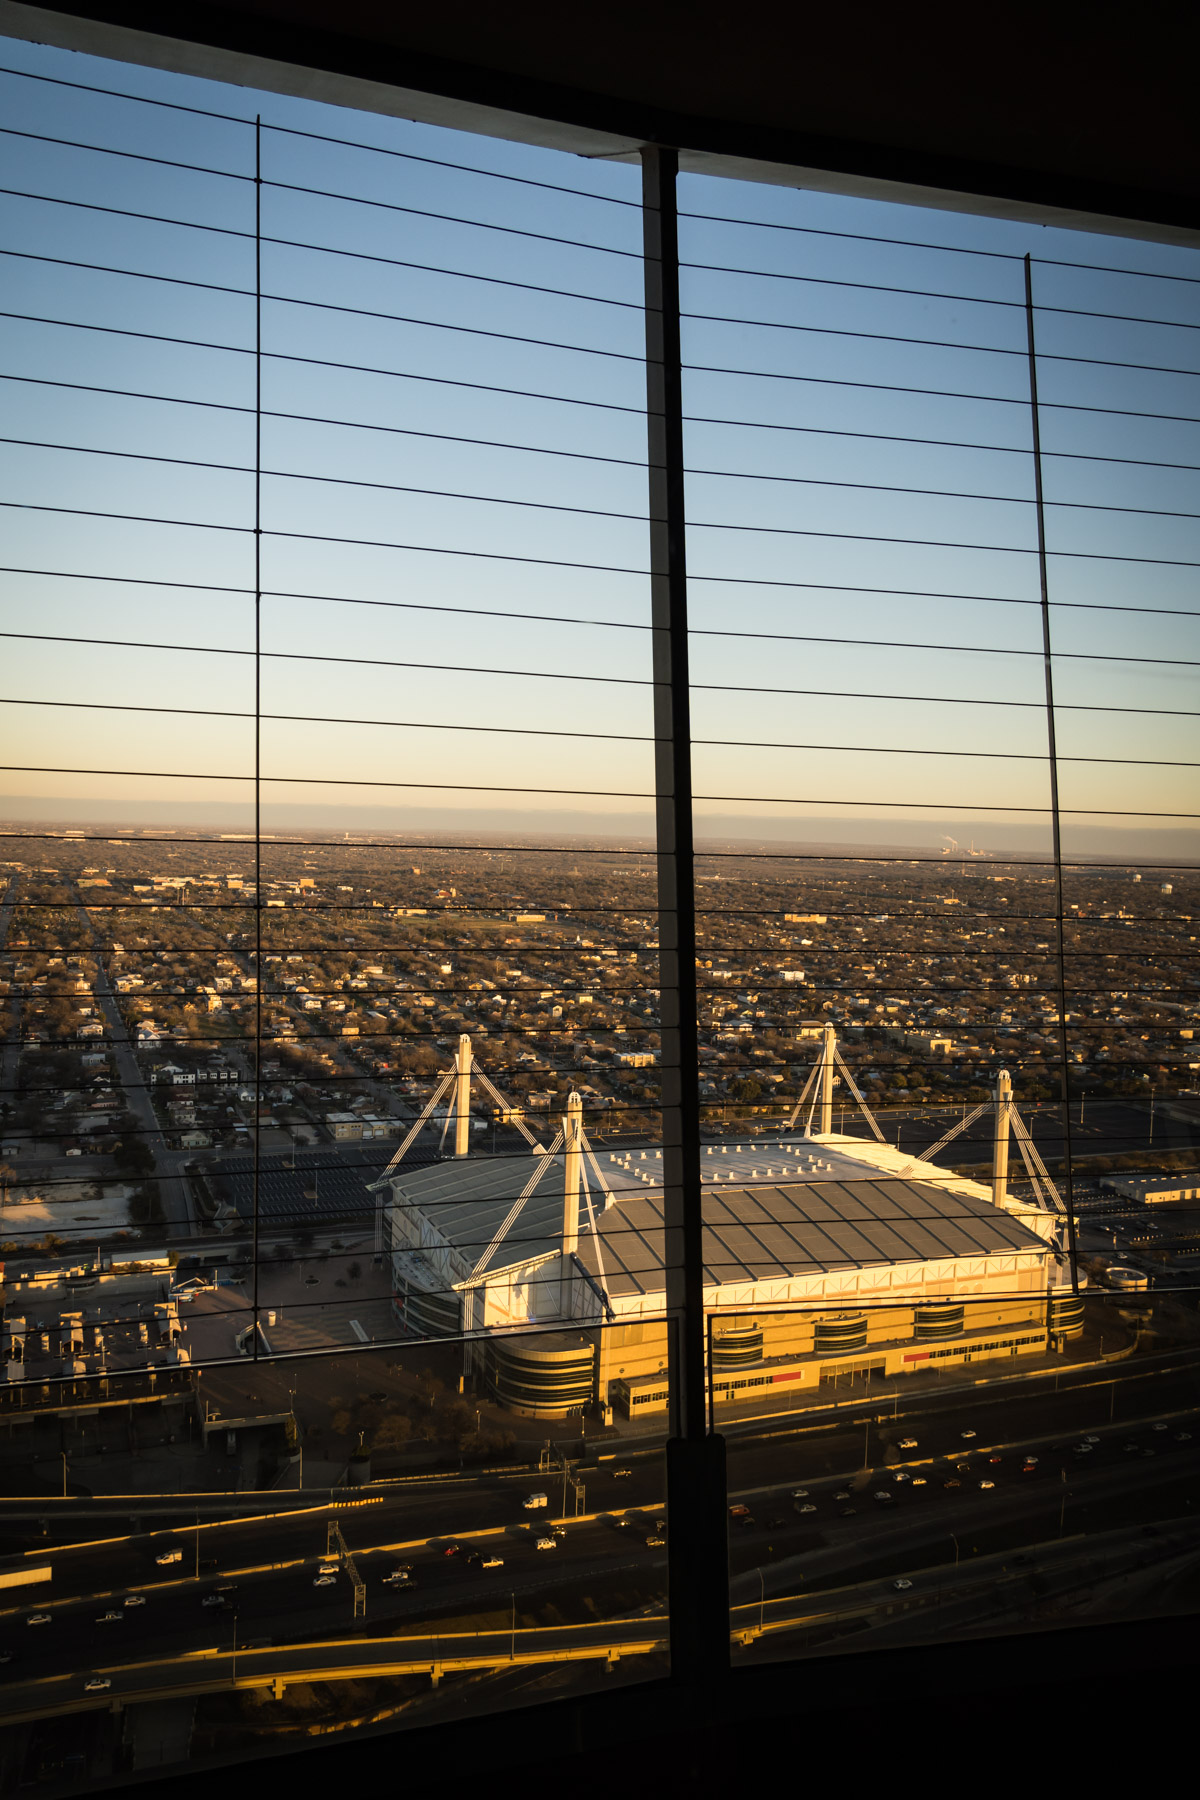 View of the Alamodome in San Antonio from the Tower of the Americas